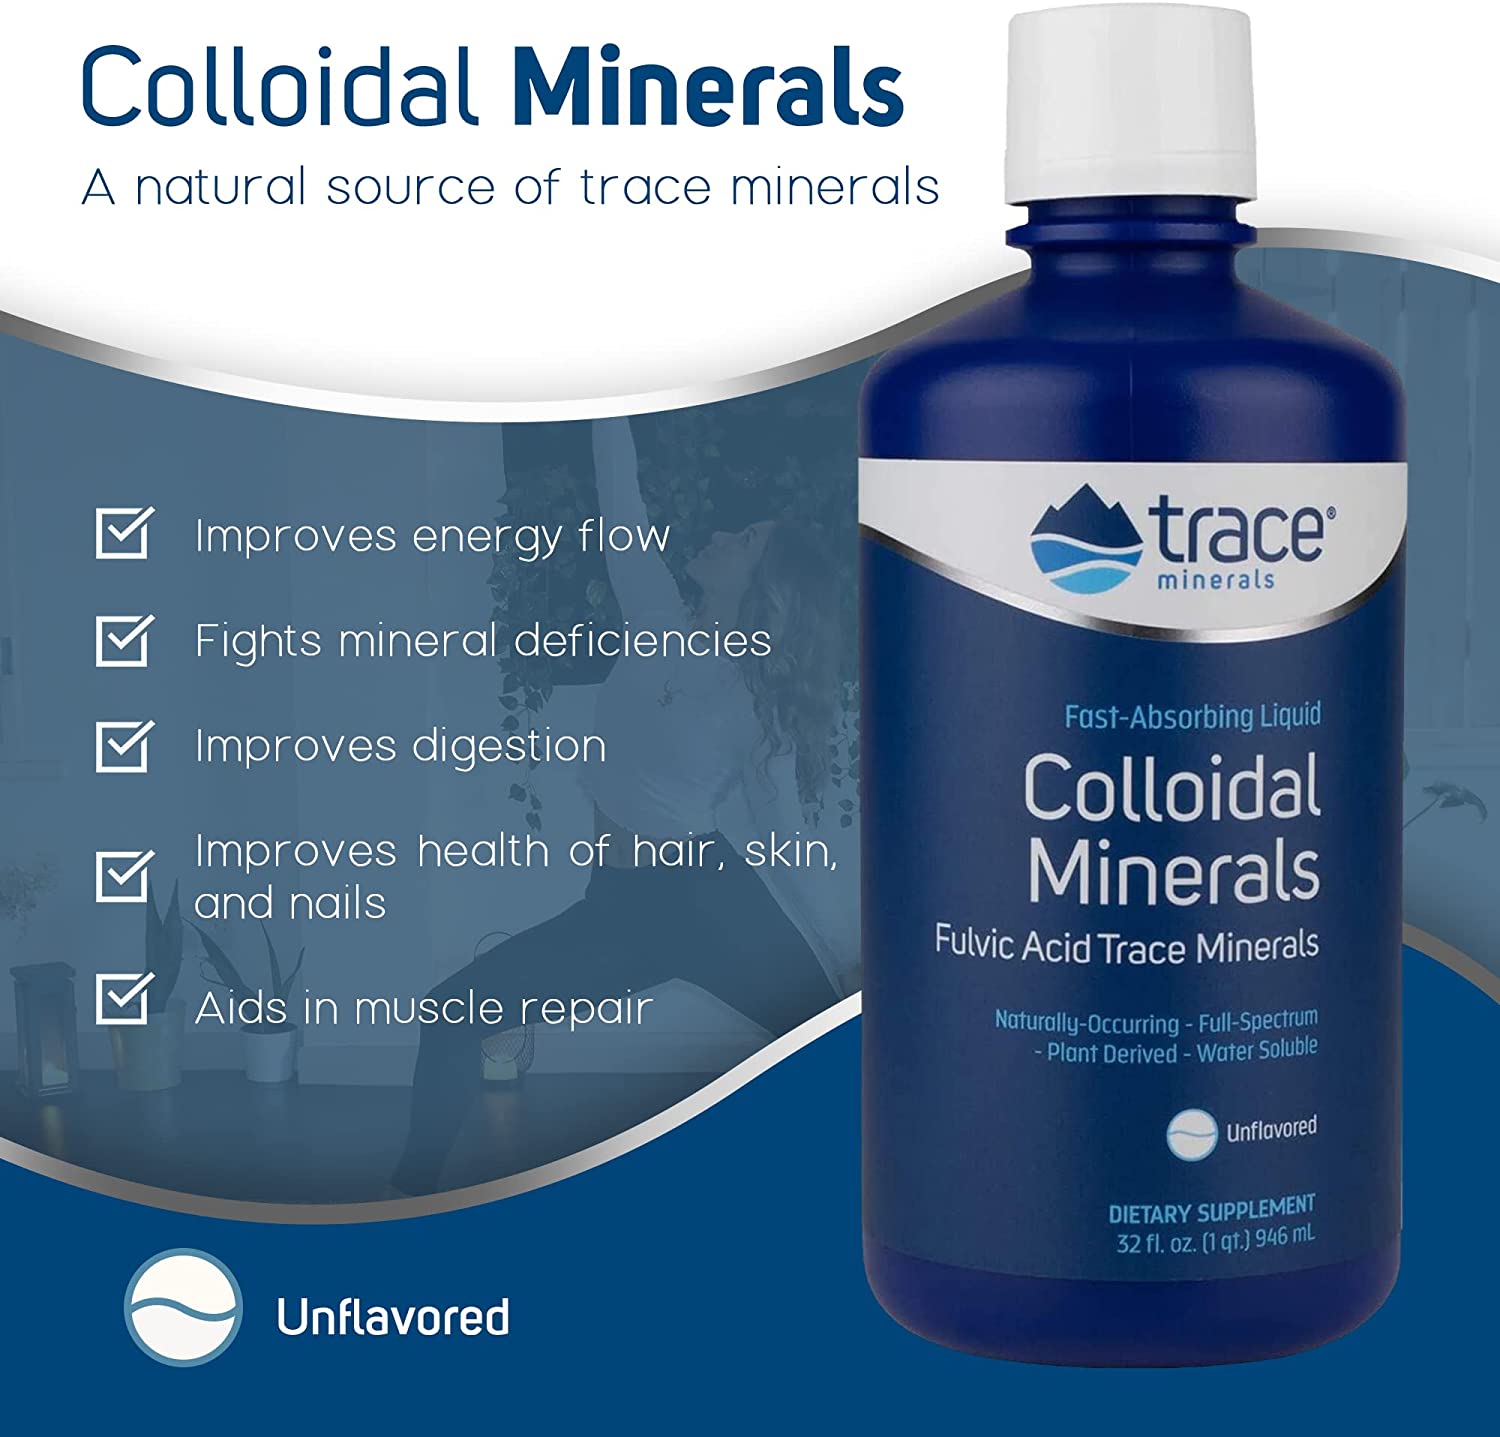 Trace Minerals Colloidal Minerals, Unflavored - 946 ml